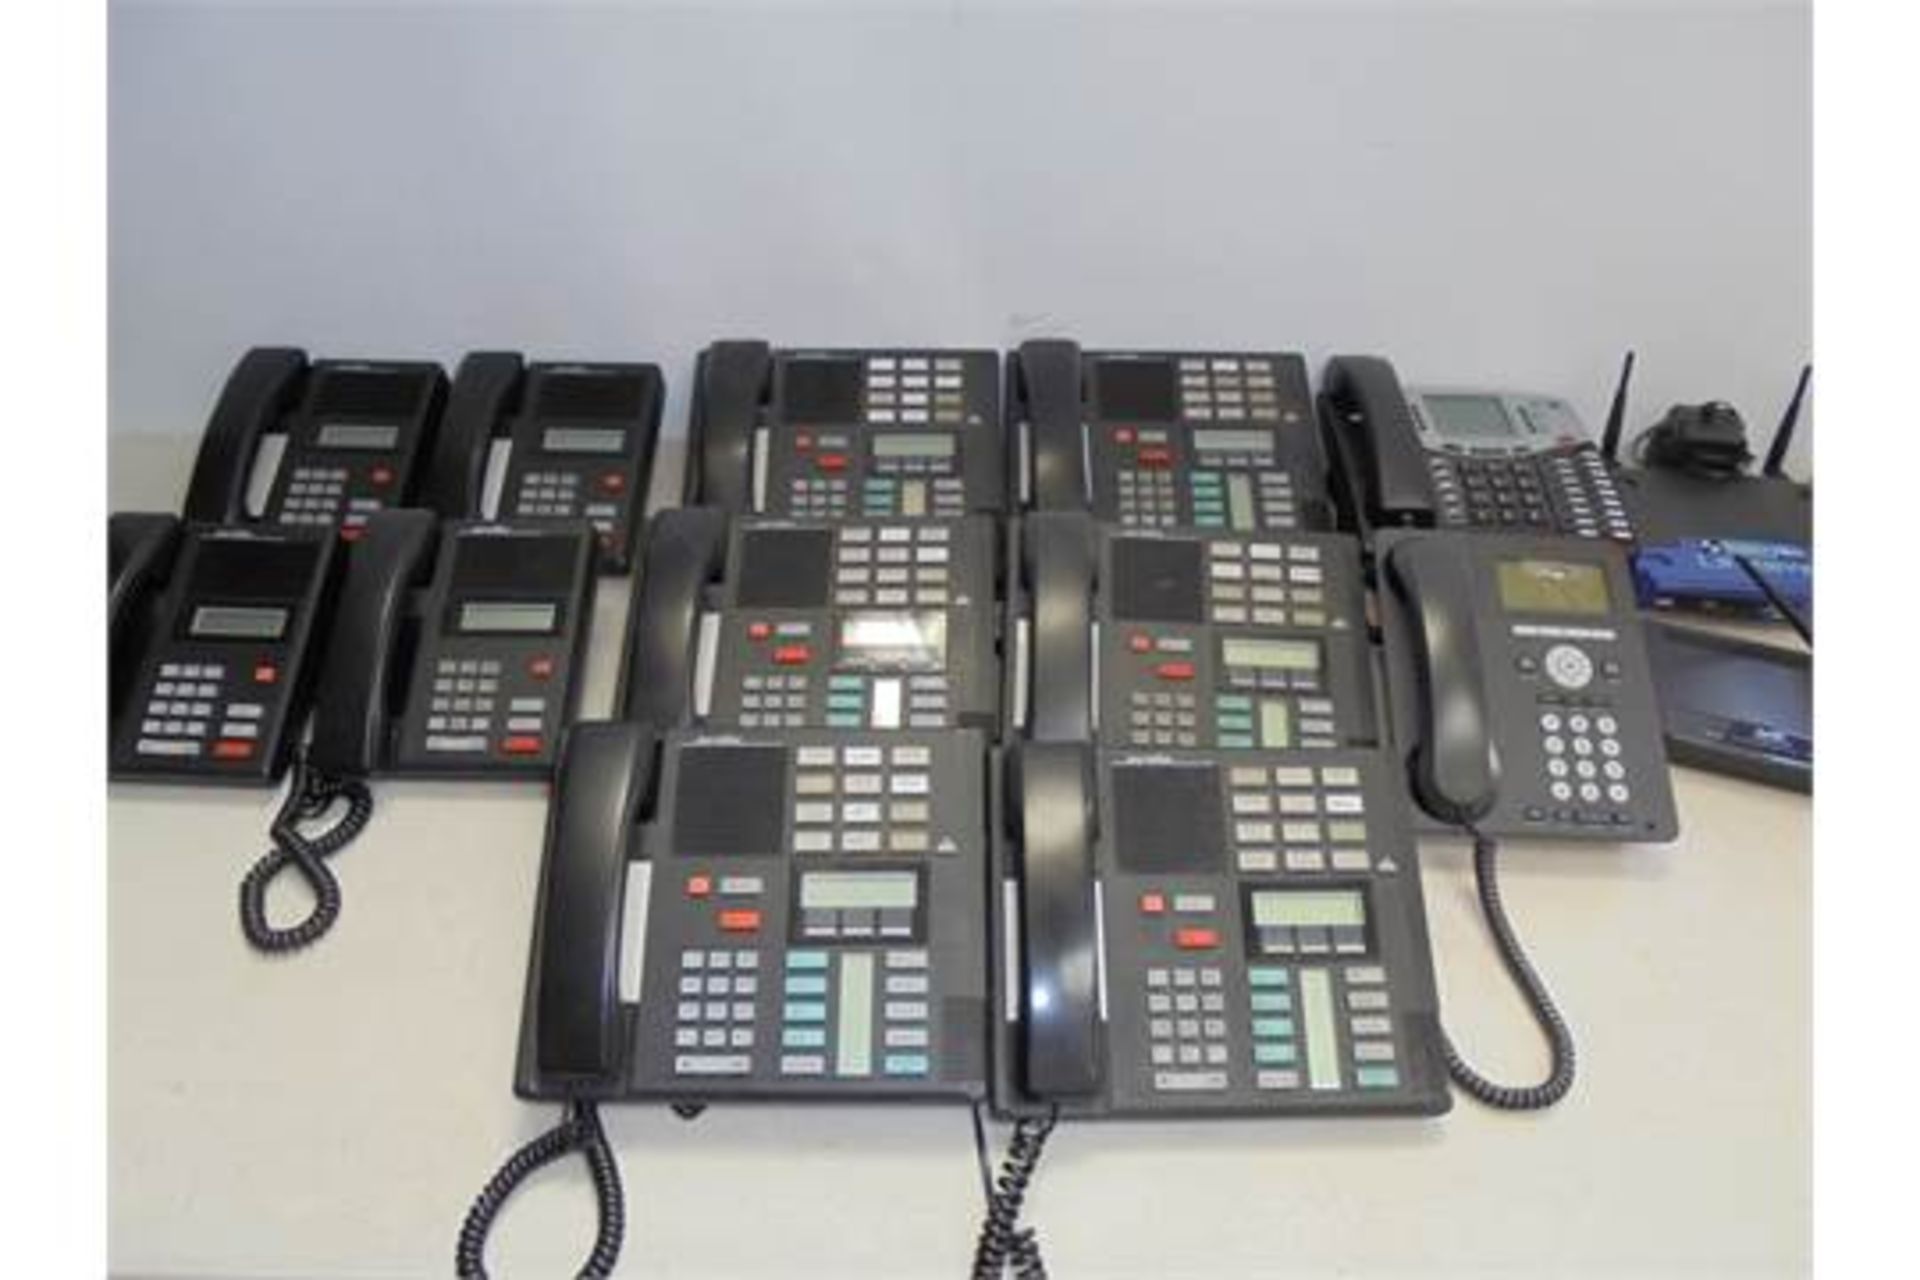 12 Telephone Handsets & 3 Routers to Include; 6 x Meridain M7310, 4 x Meridian M7100, 1 x BT 8662E ,